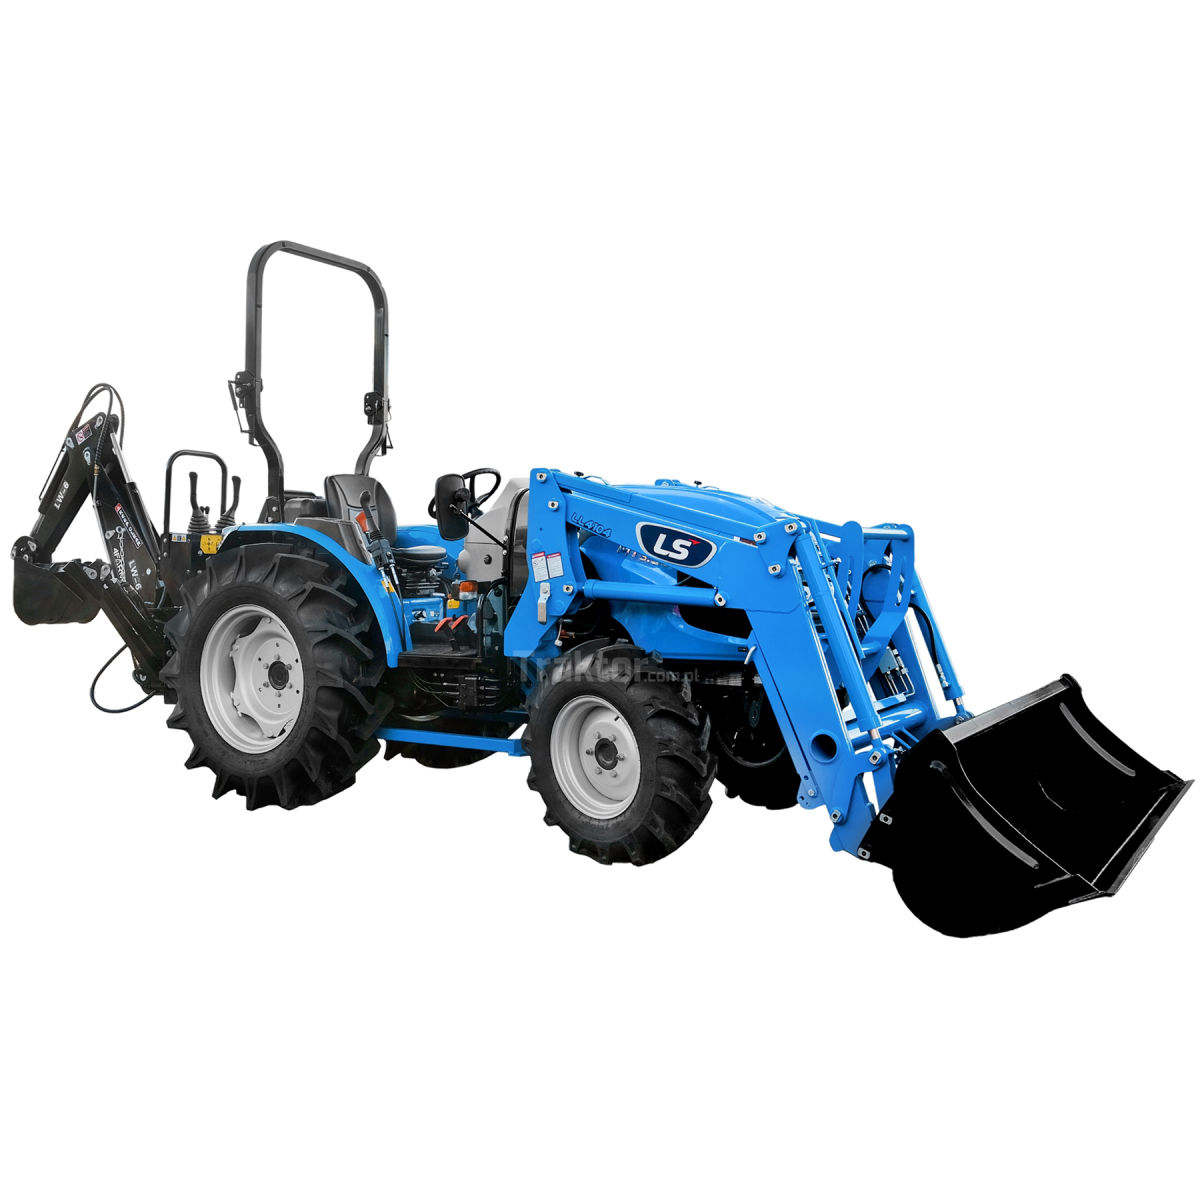 LS Tractor MT3.50 HST 4x4 - 47 HP + chargeur frontal TUR LS LL4104 + pelle pour tracteur LW-6 4FARMER